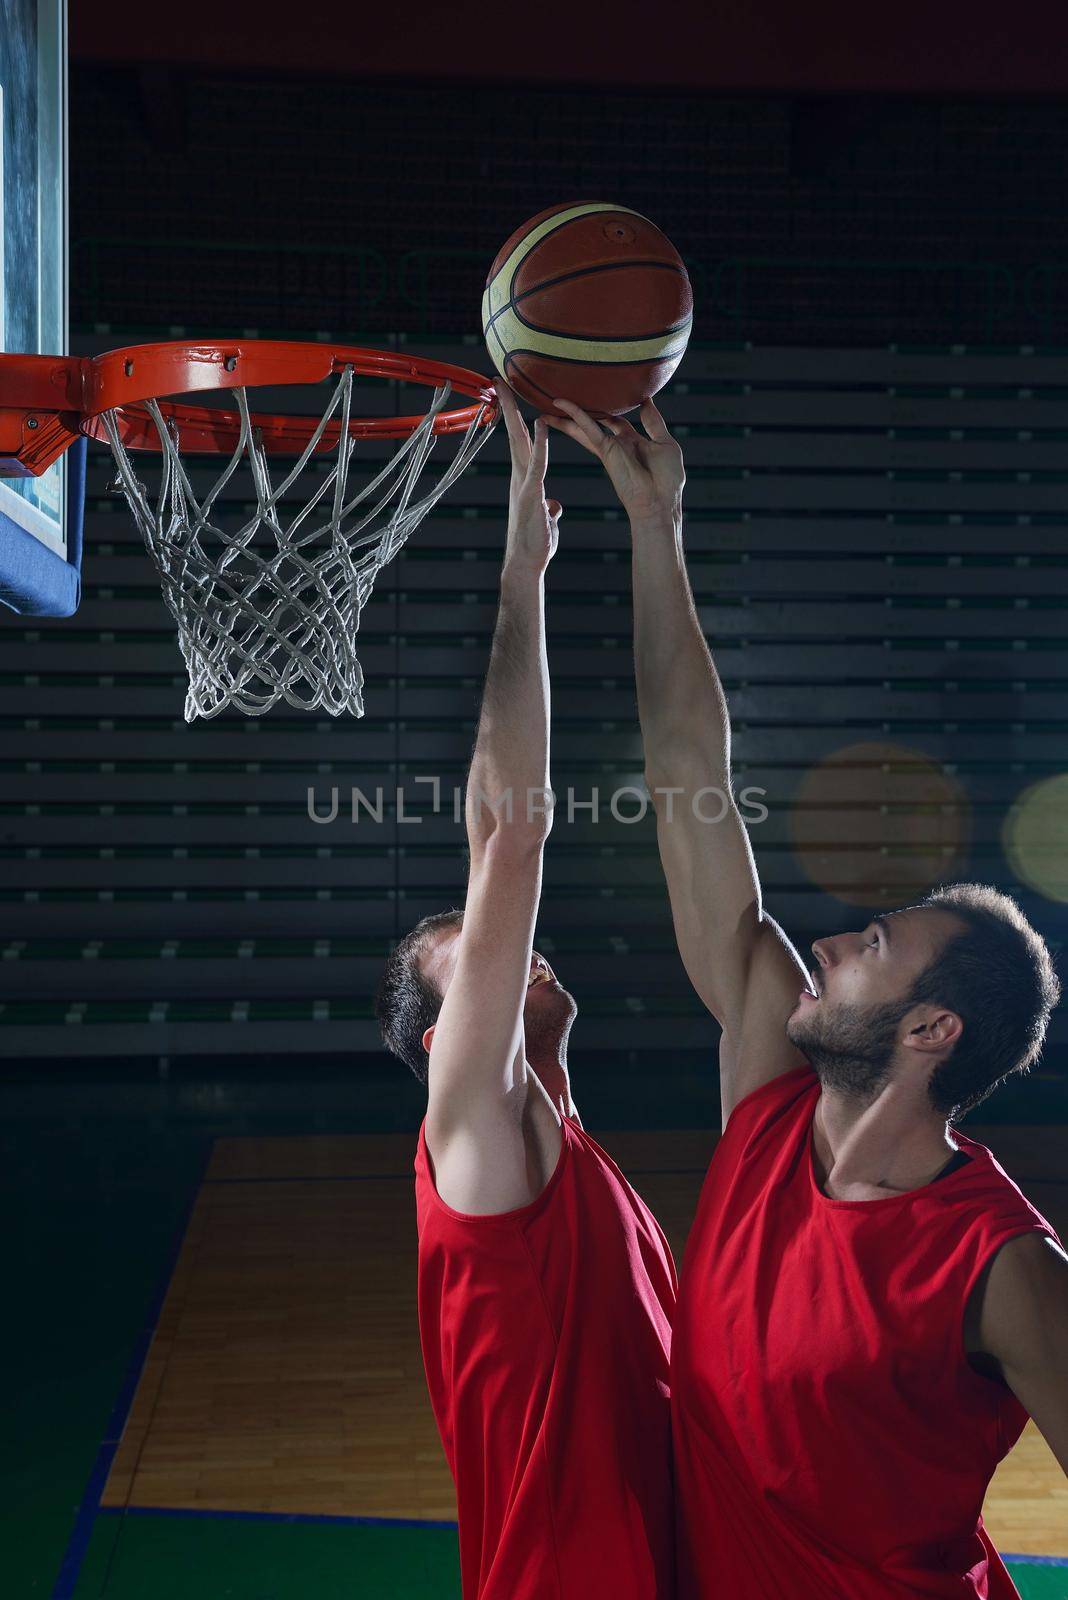 basketball player in action by dotshock